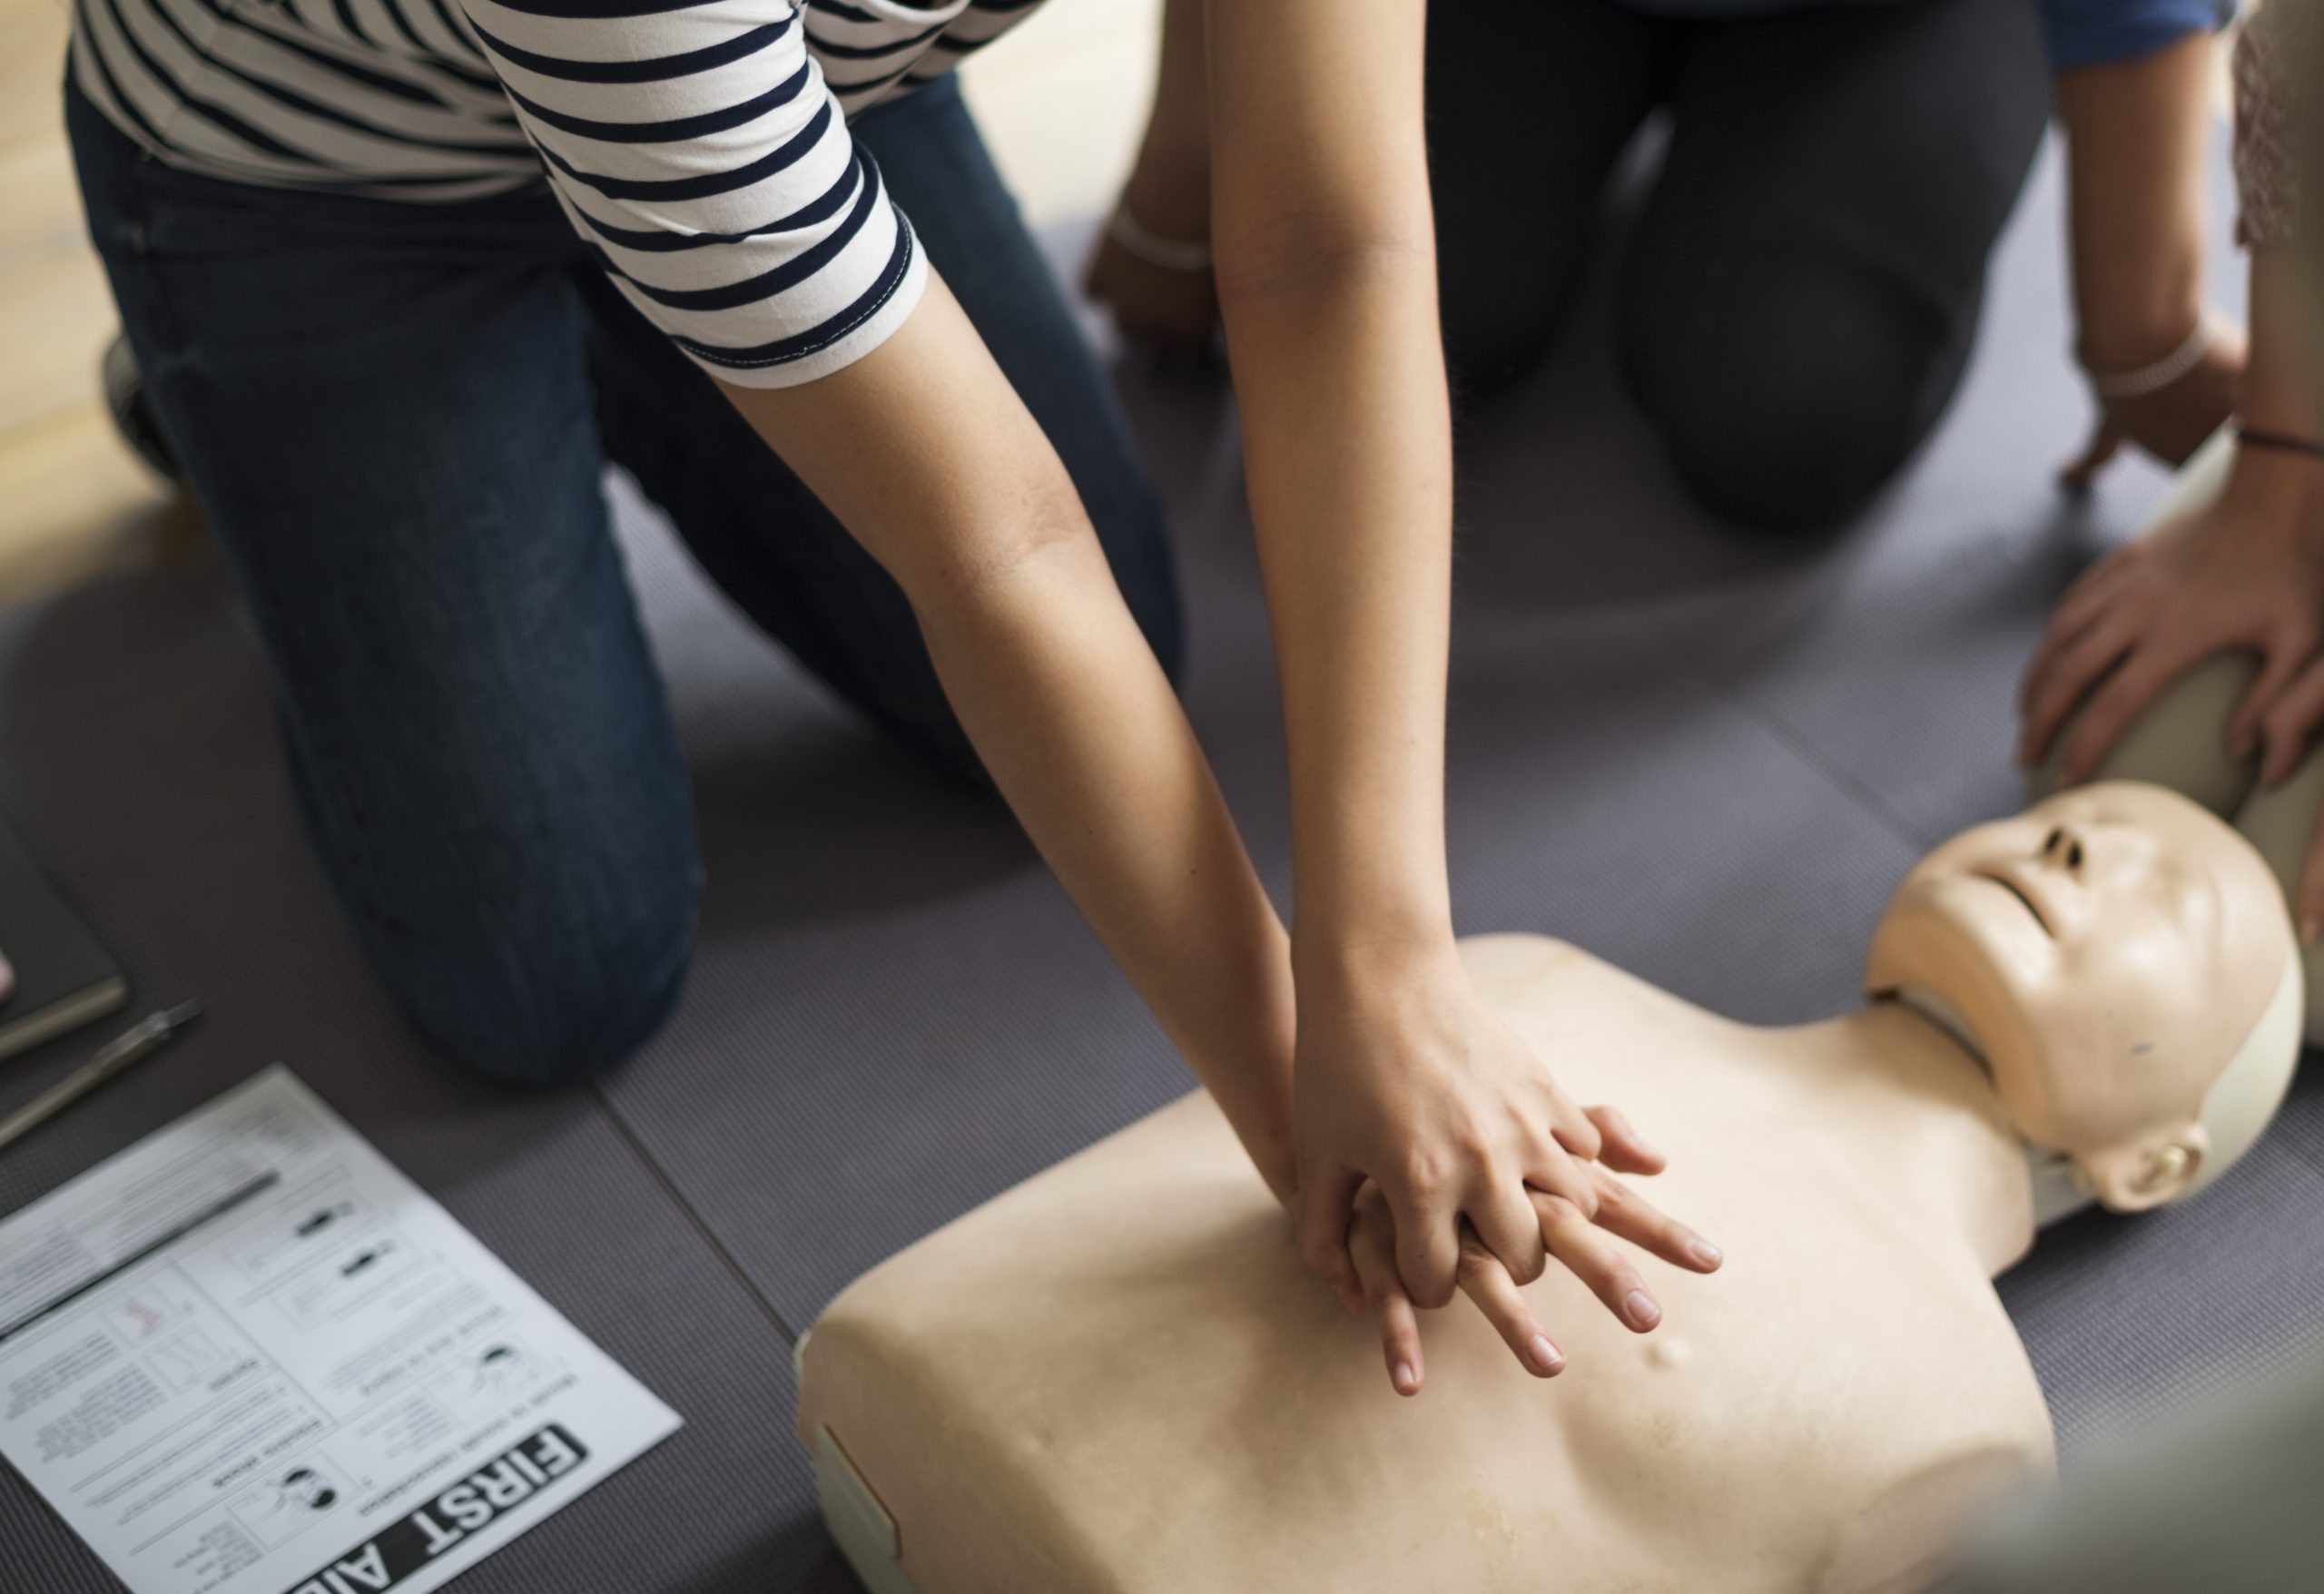 Houston CPR Training: Become a Lifesaver in 3 Easy Steps